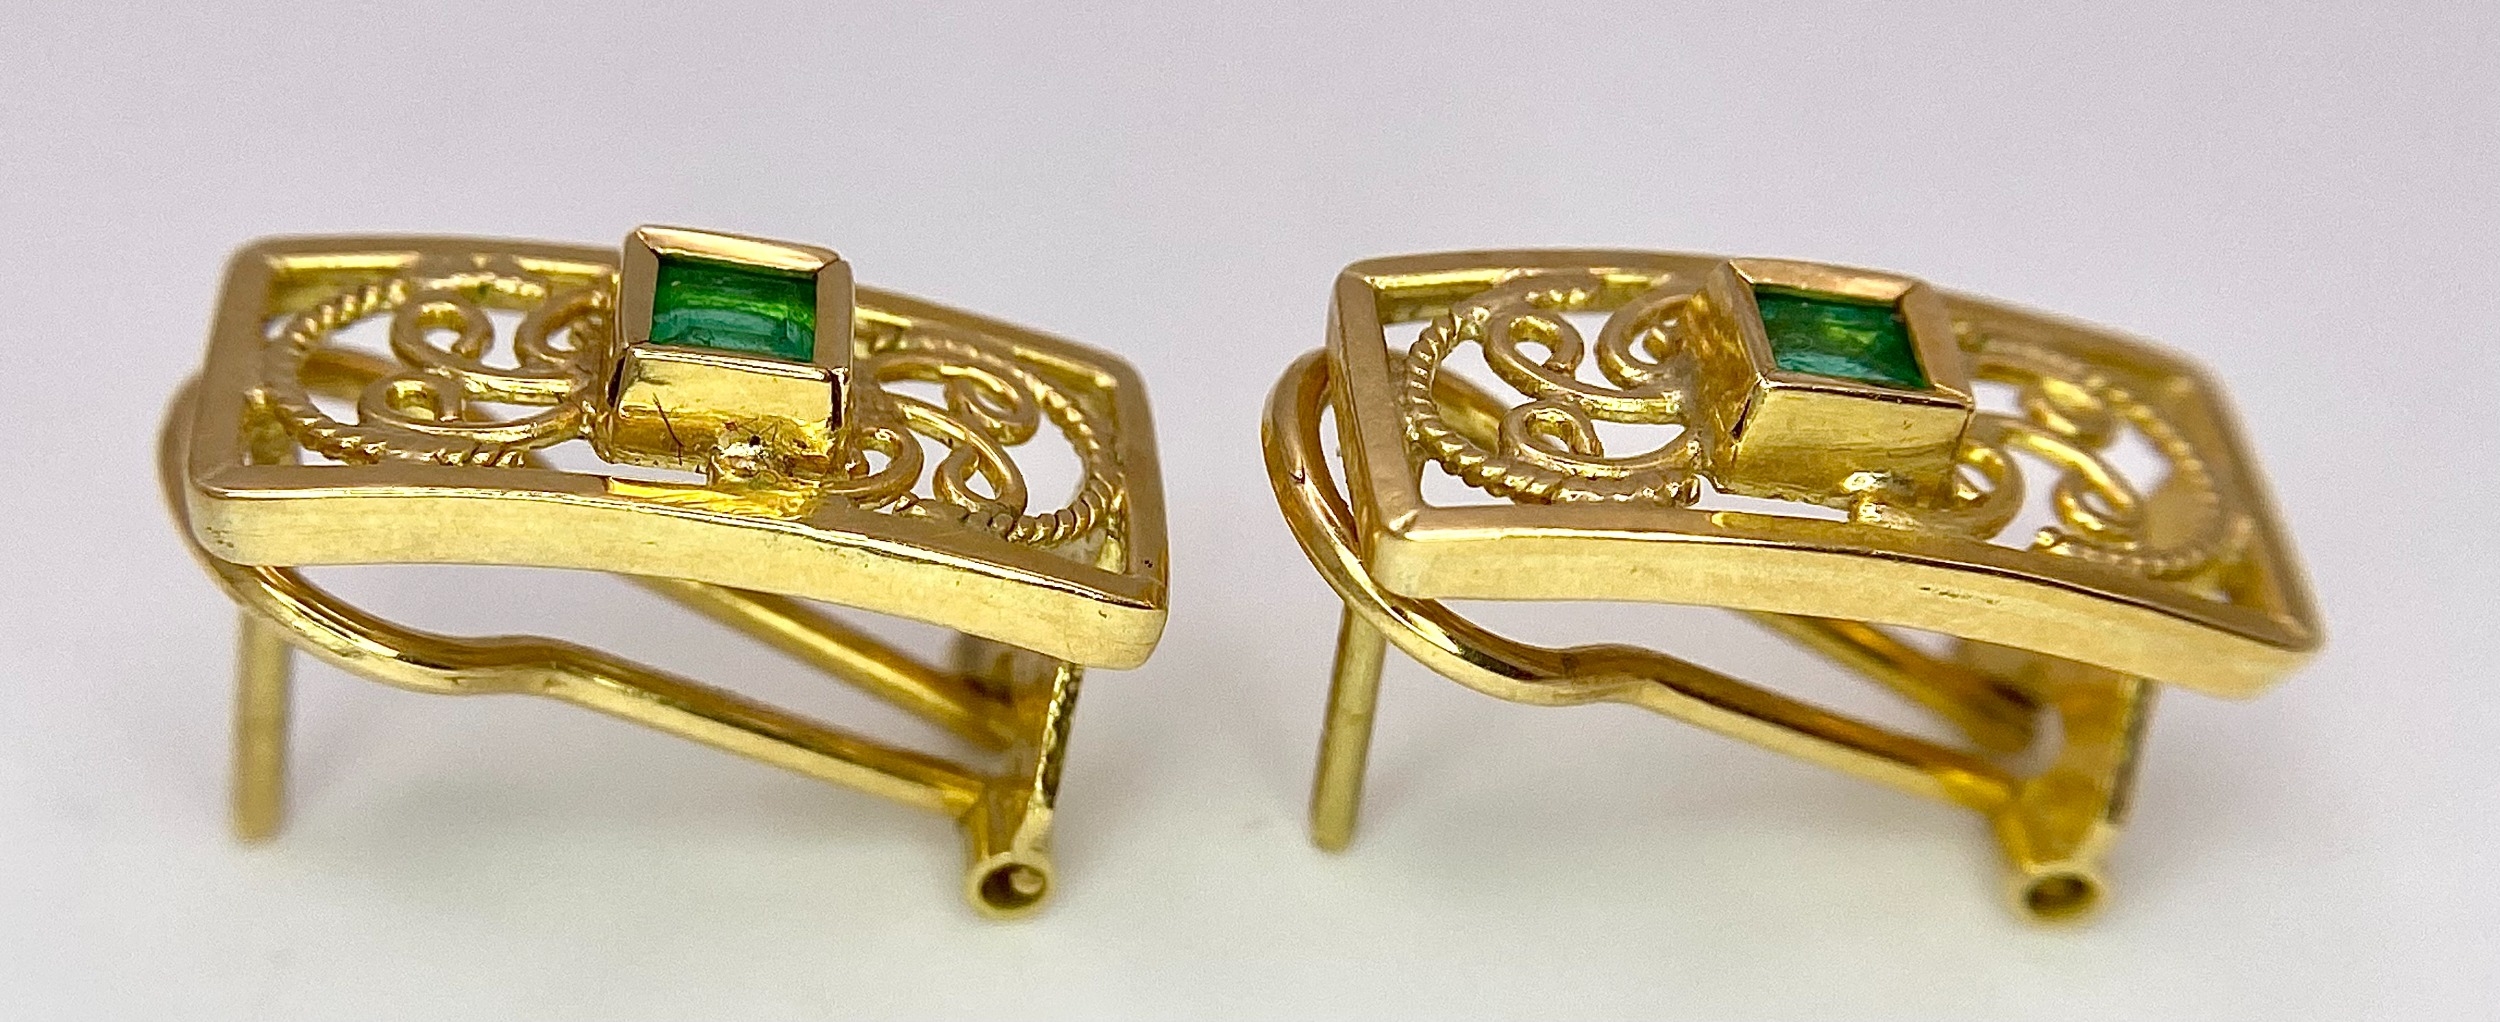 A Pair of 18K Yellow Gold and Emerald Earrings. Clip clasp with pierced decoration. 17mm. 3.9g total - Image 4 of 6